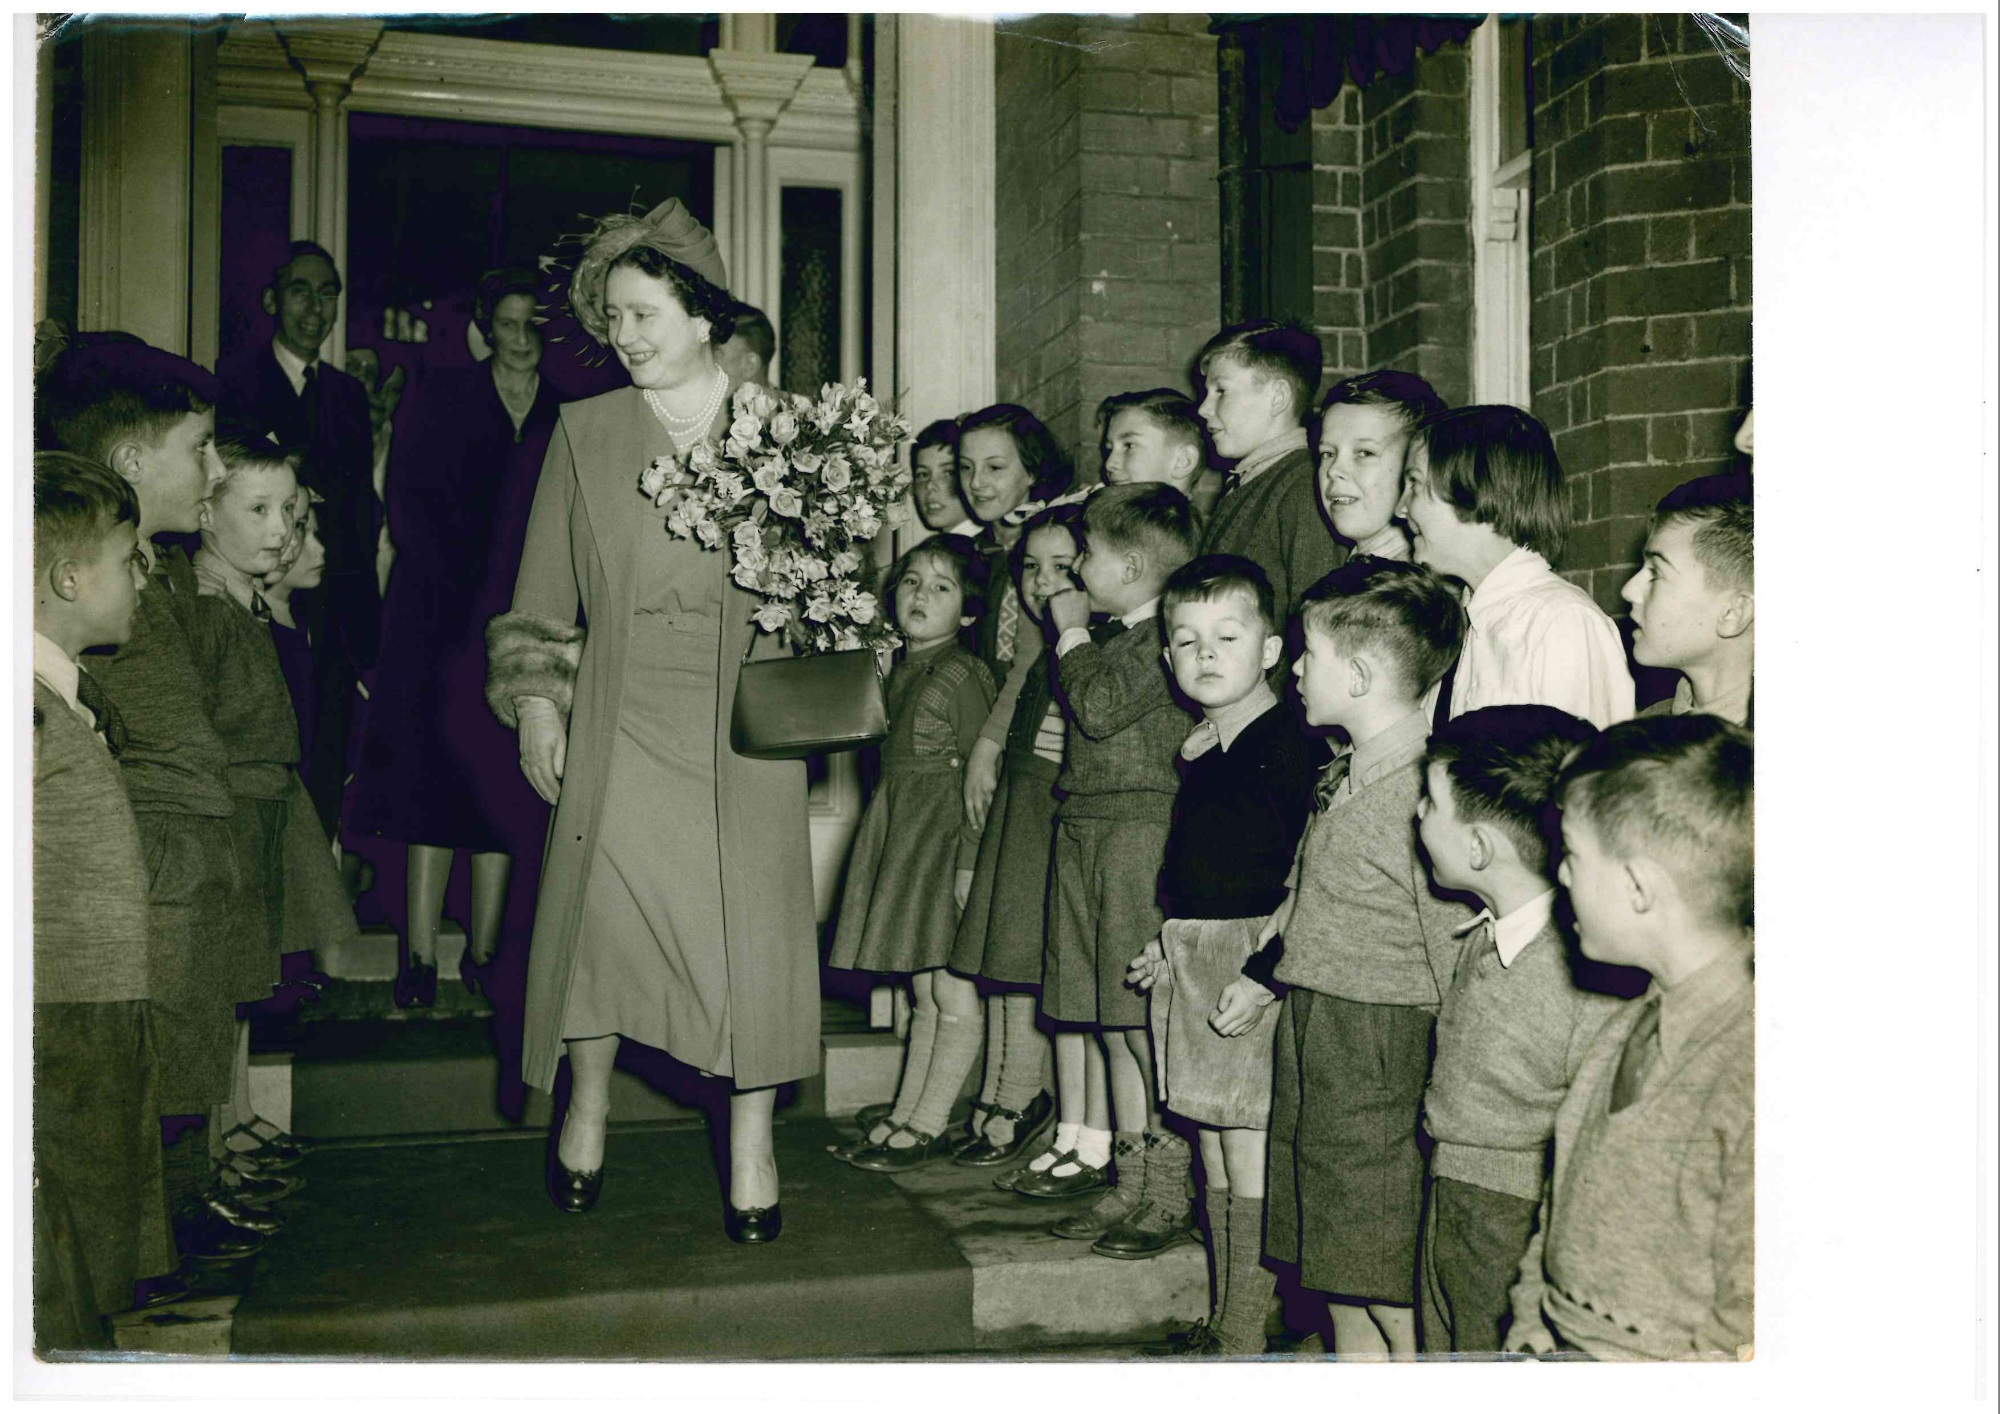 Our first patron Her Majesty, Queen Elizabeth, Queen Mother, on her visit to Moor House in 1953